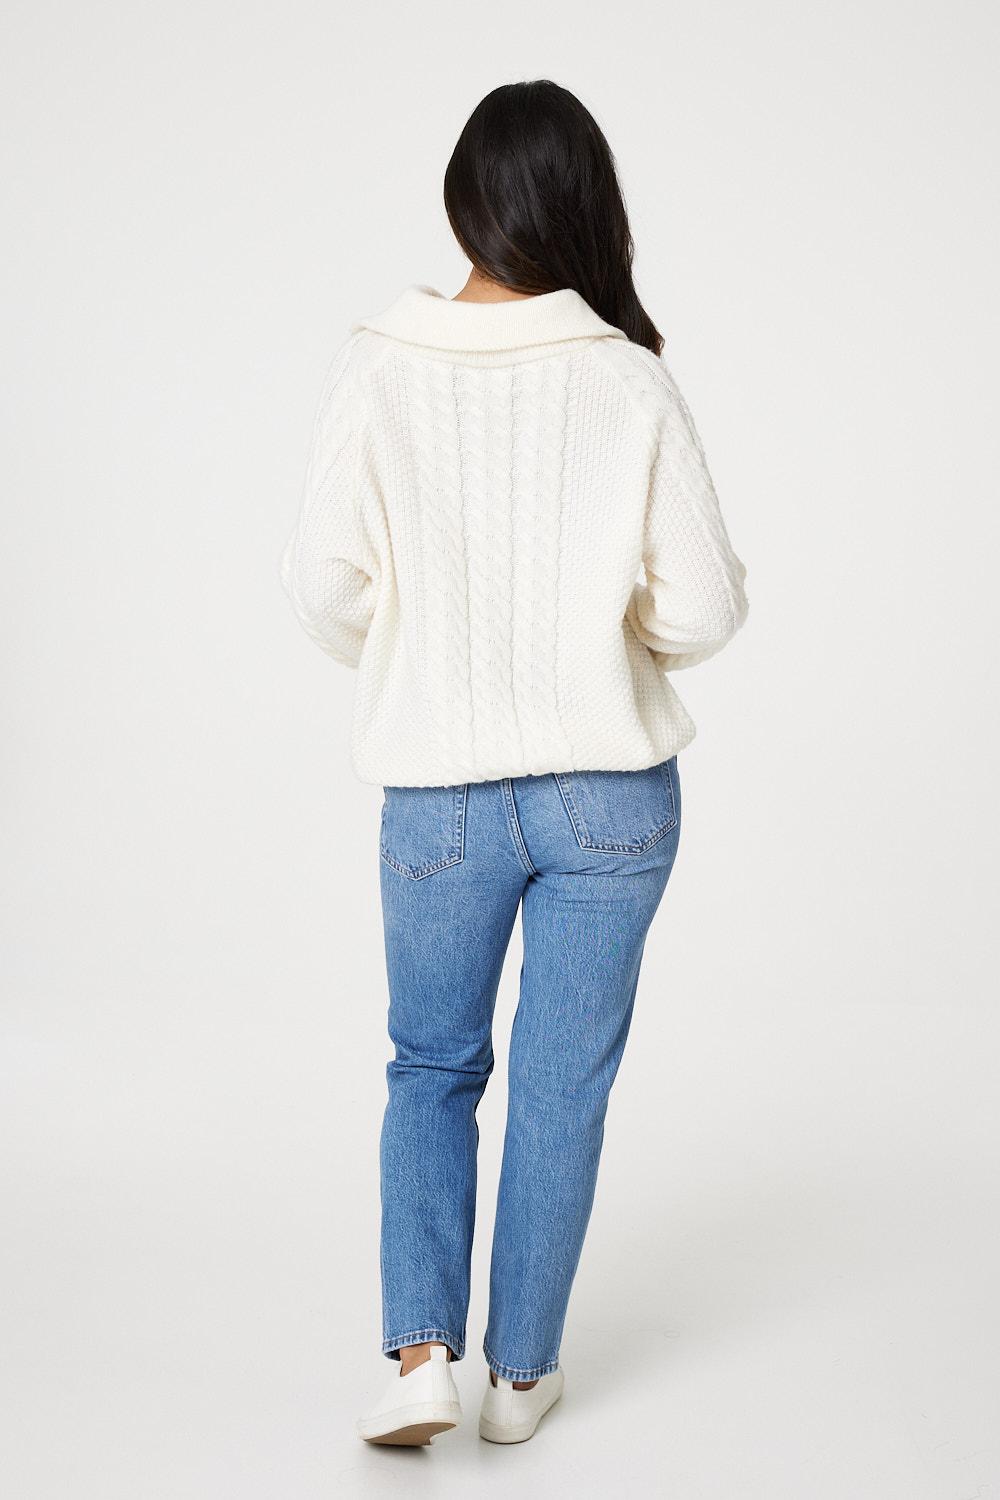 White | Cable Knit Zip Neck Knit Jumper